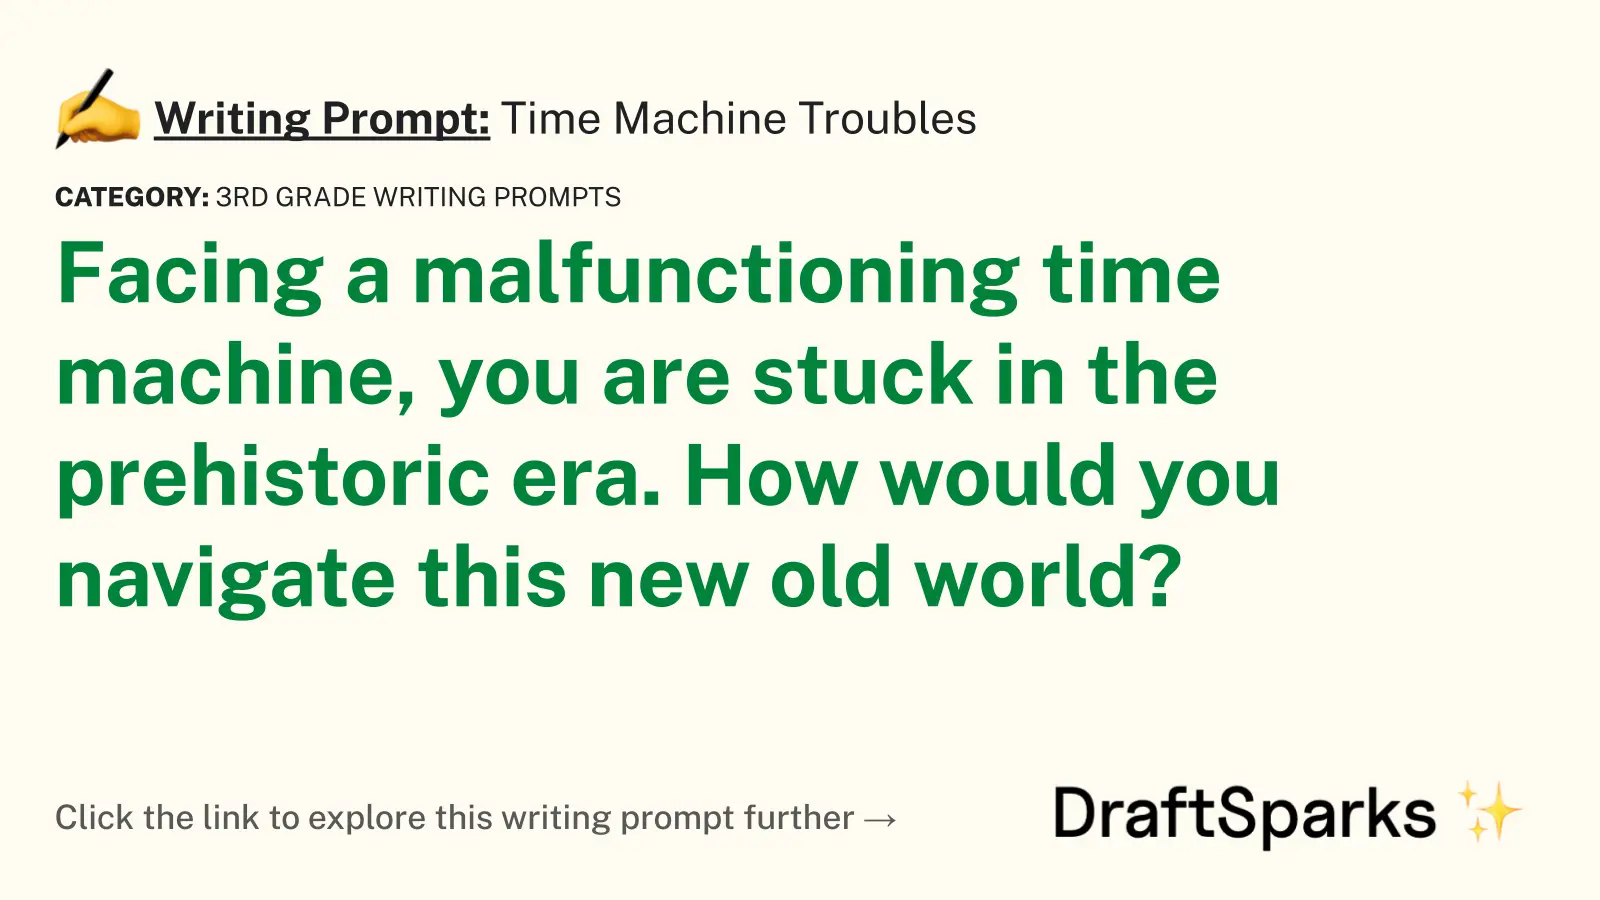 Time Machine Troubles